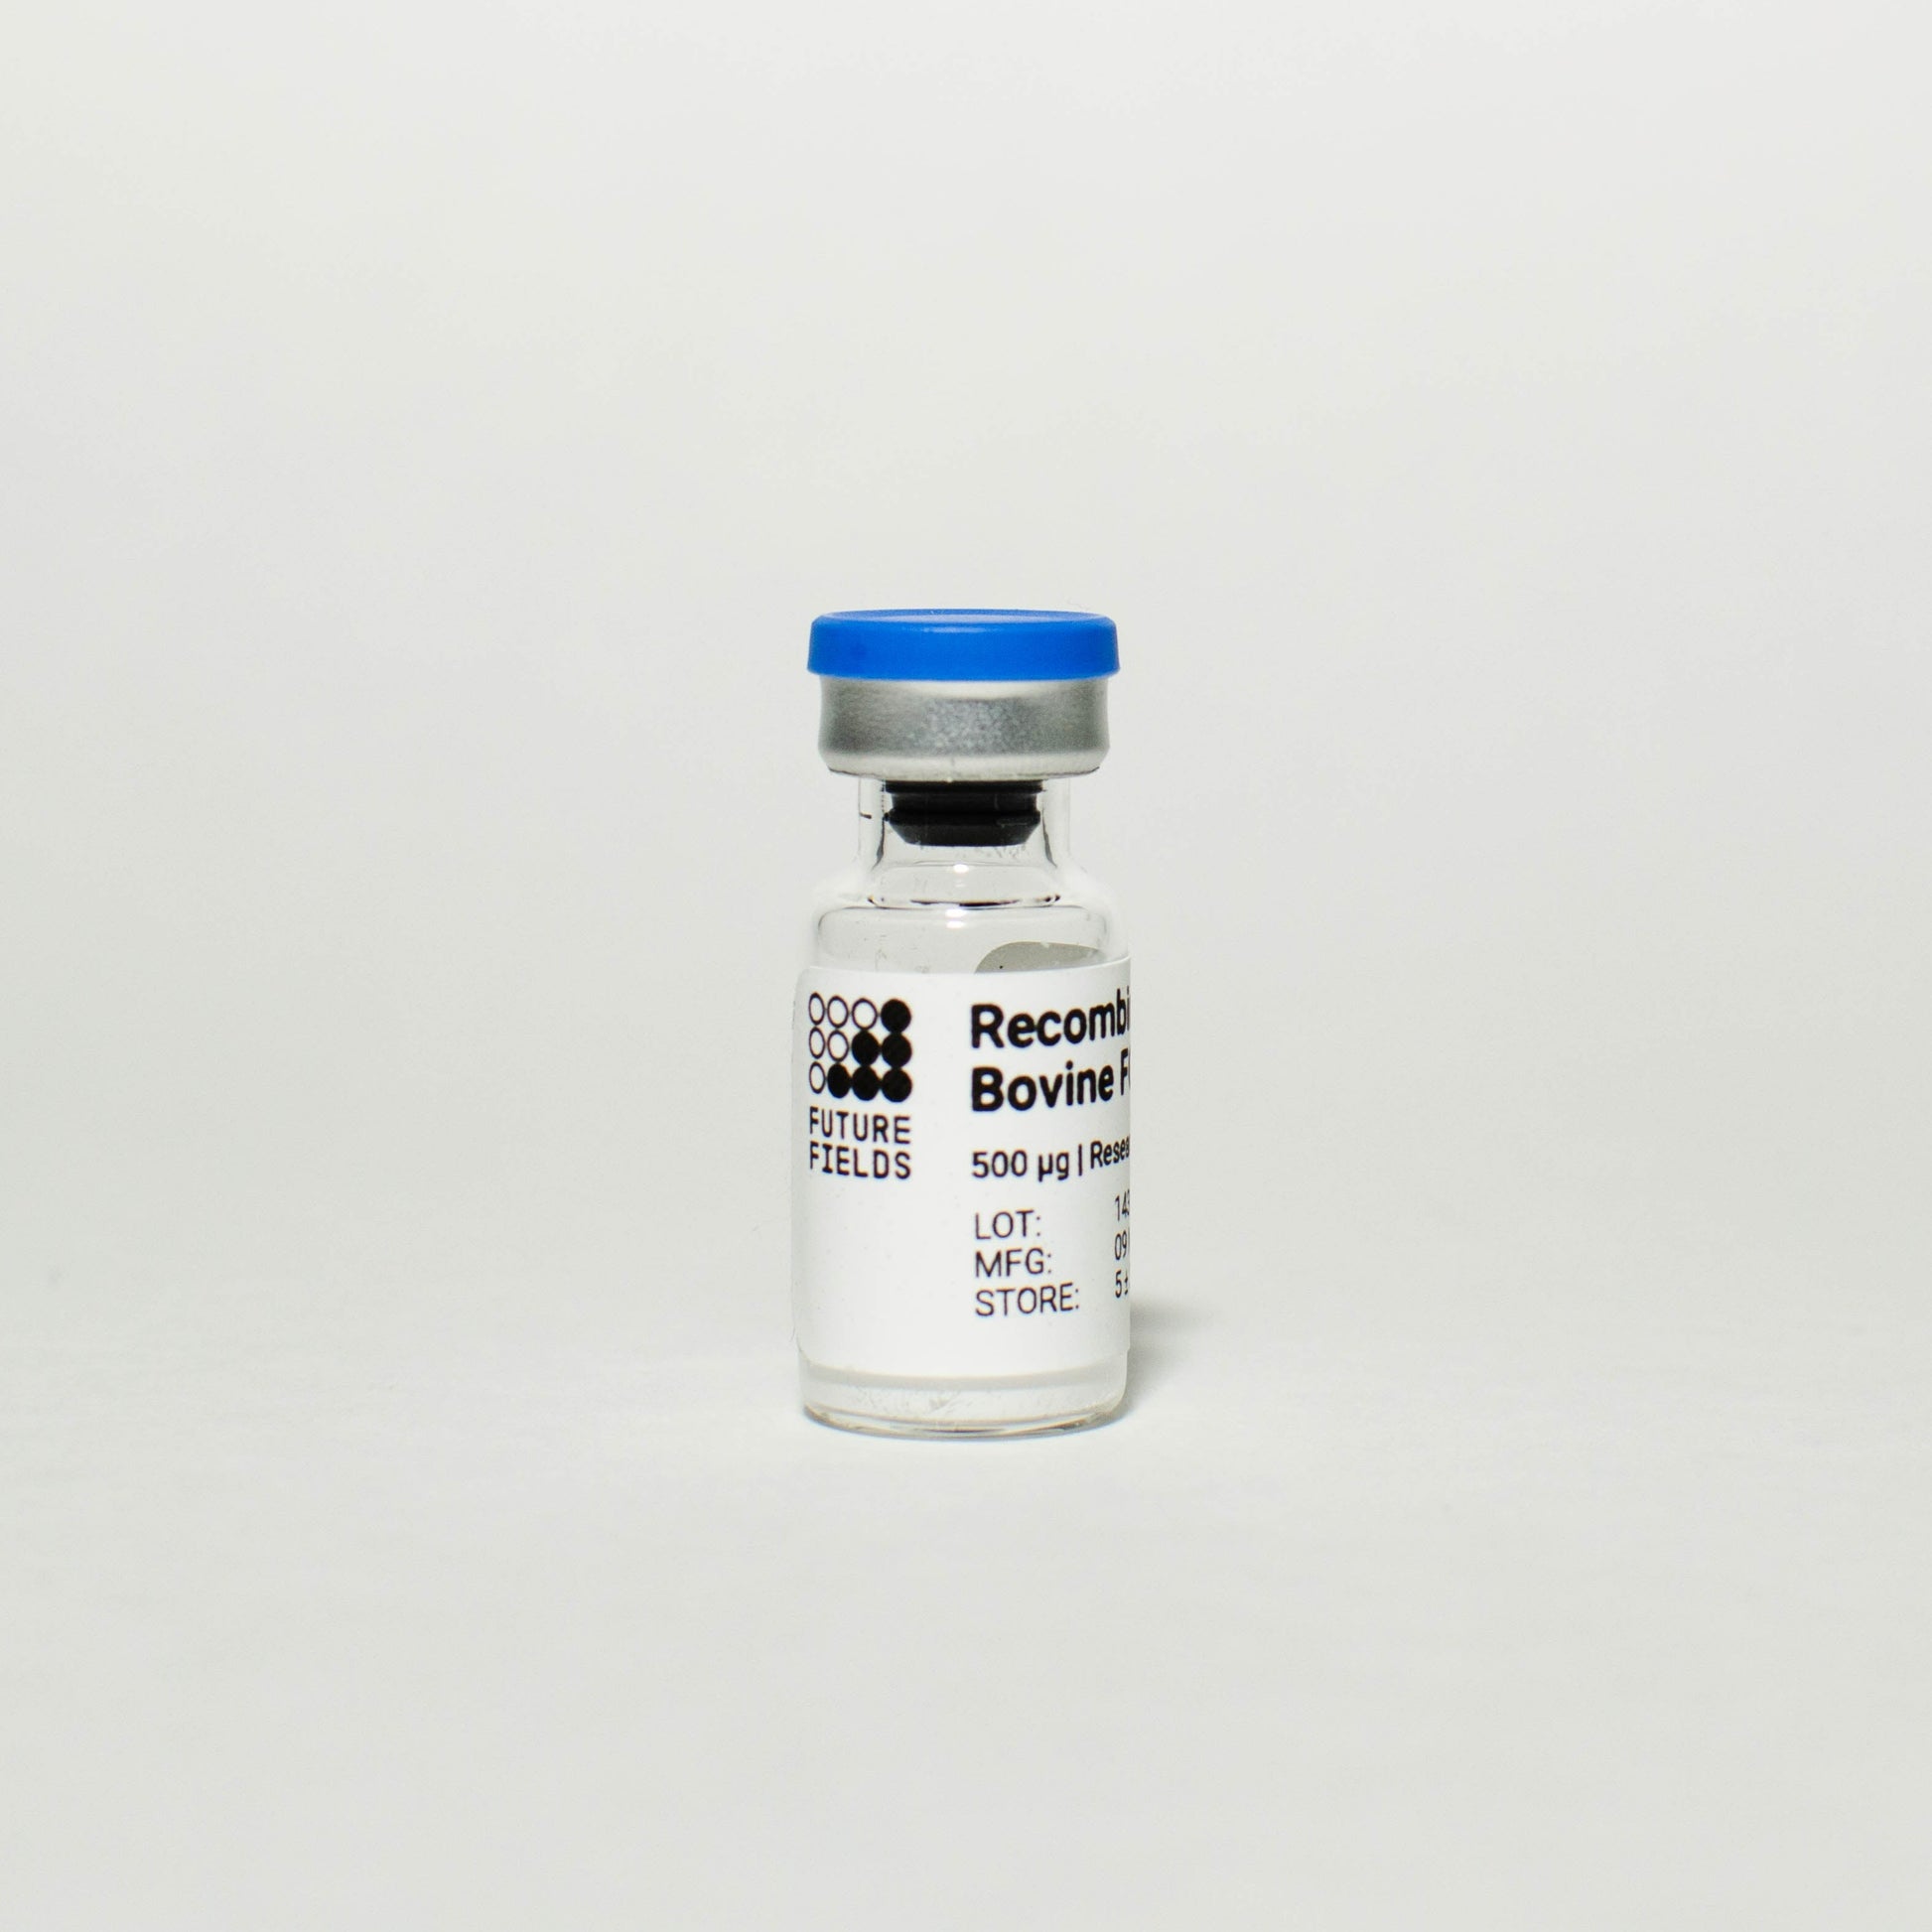 Picture of a small vial with a white that reads "Recombinant Bovine FGF2", product information, and the Future Fields logo. Future Fields Recombinant Bovine FGF2 is an active FGF2 growth factor produced with the EntoEngine™ platform.